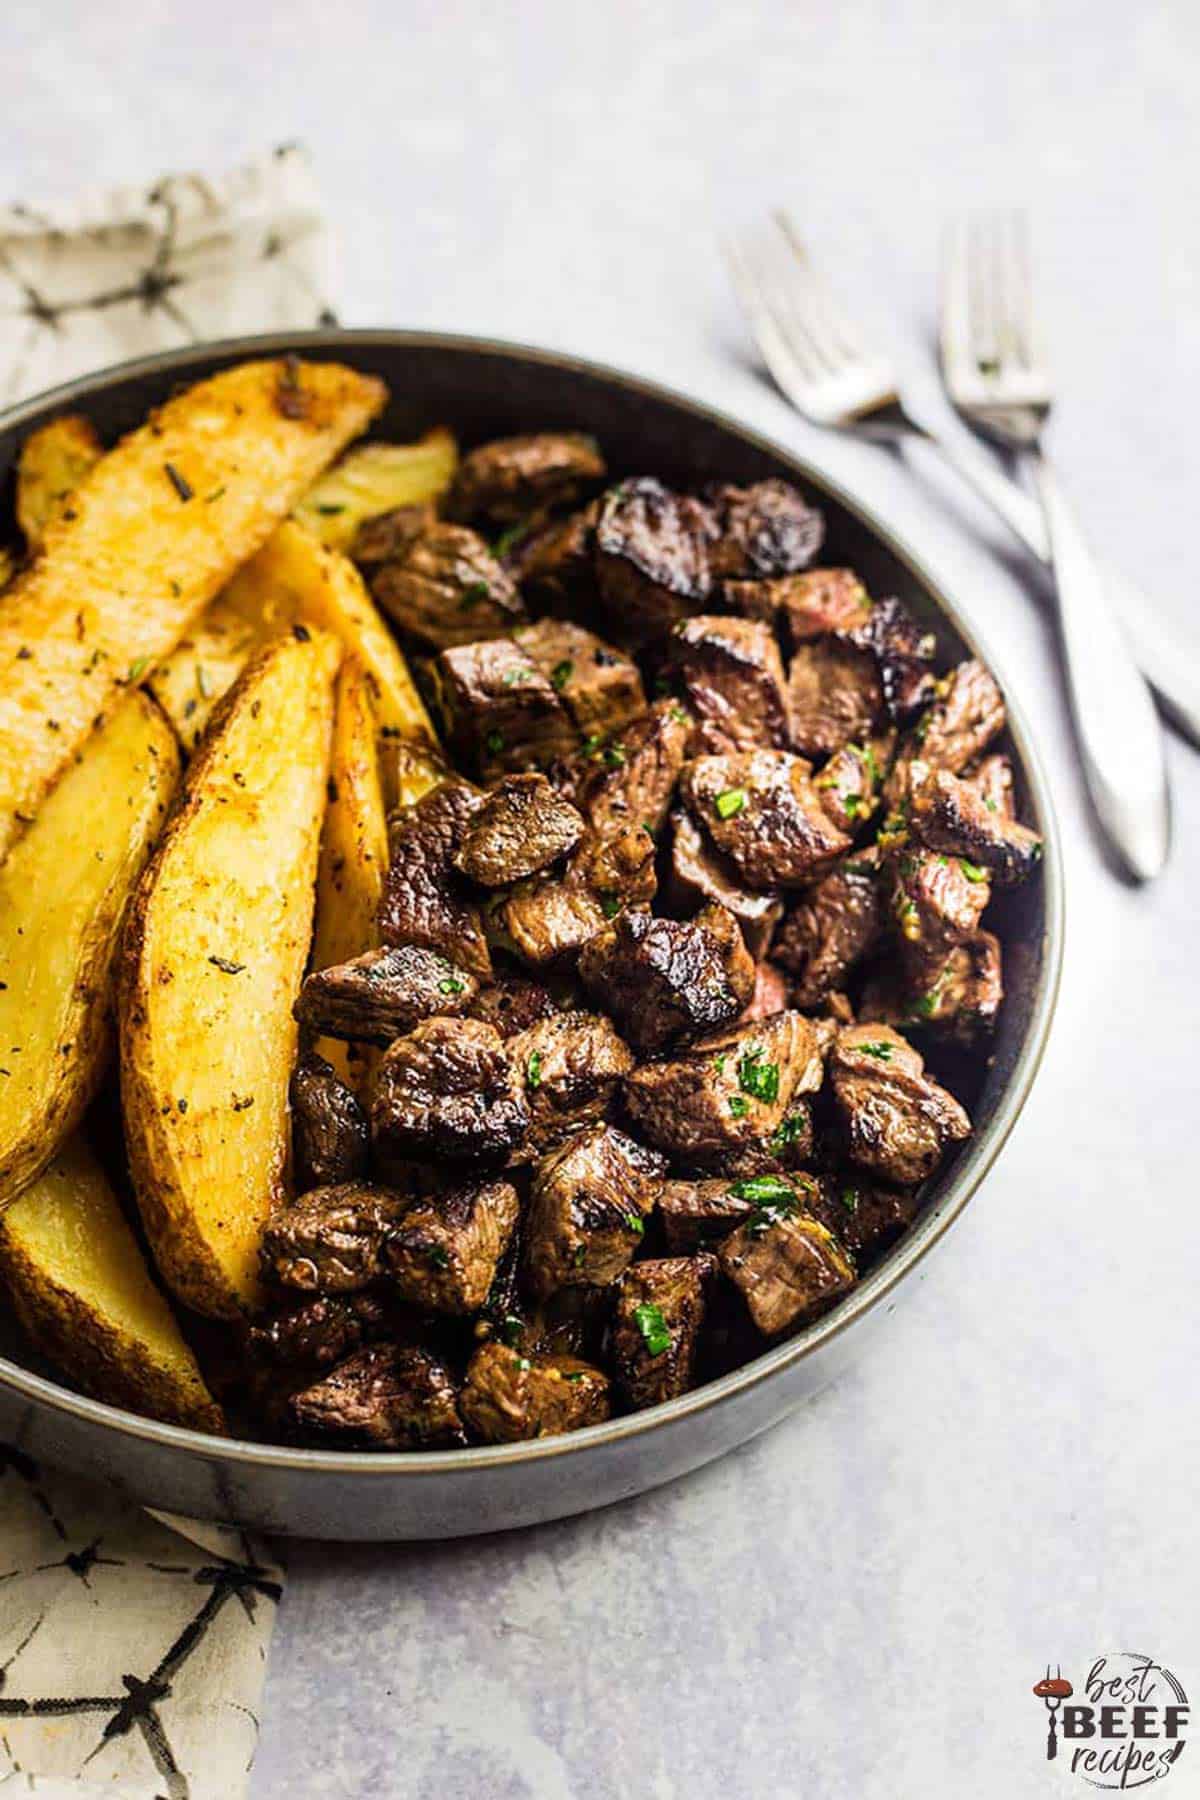 Steak bites in a round dish with baked potato wedges